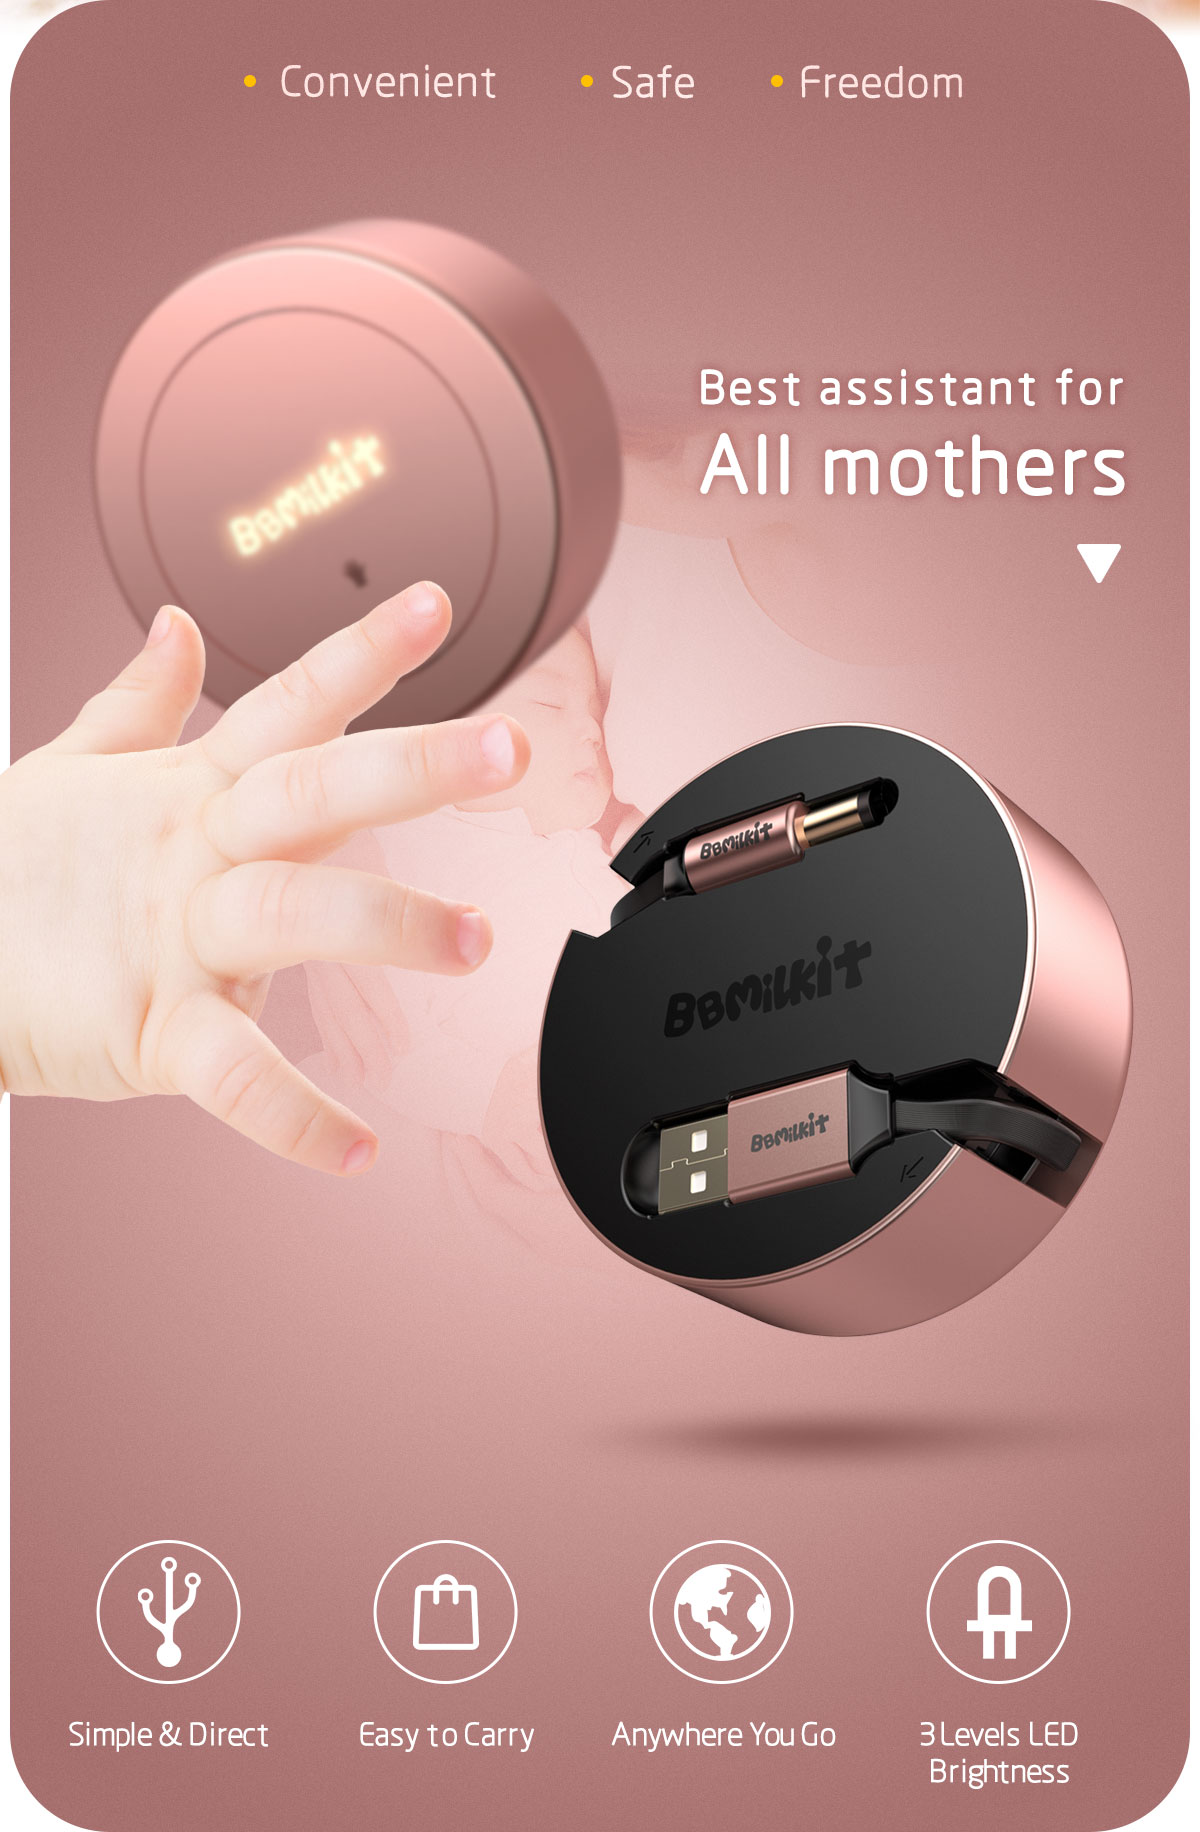 Bbmilkit breast pump usb cable